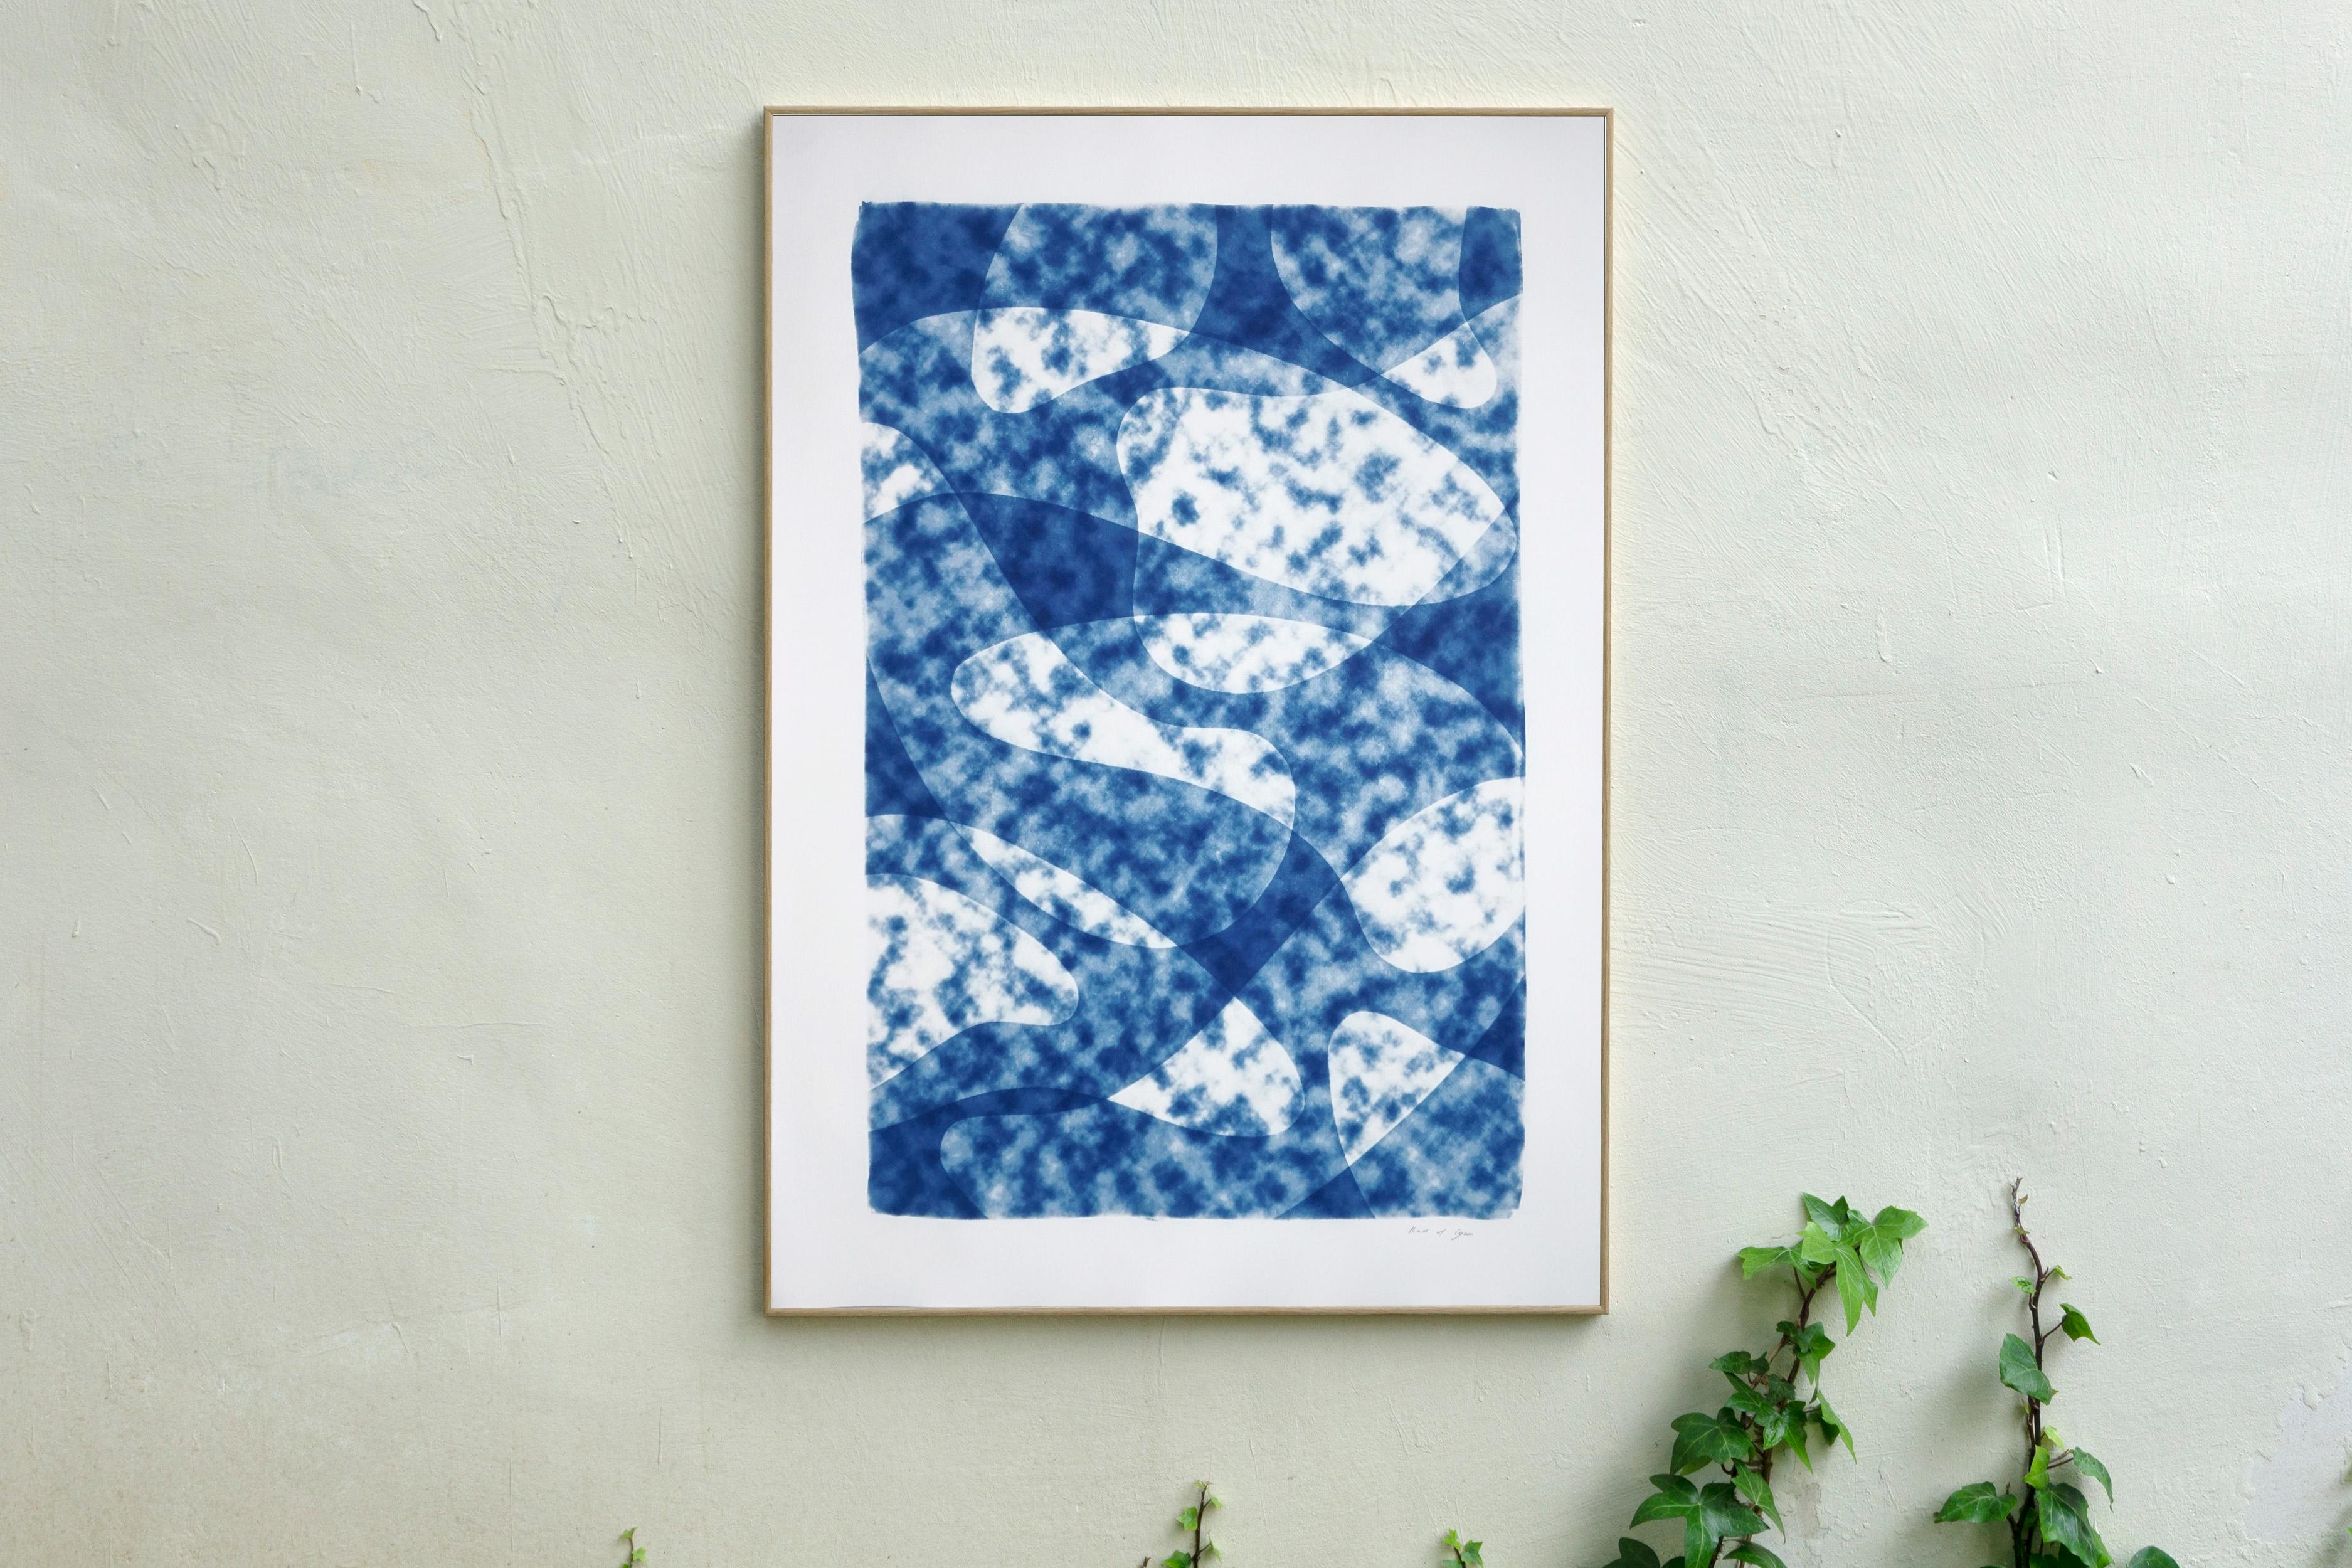 This is an exclusive handprinted unique cyanotype that takes its inspiration from the mid-century modern shapes.
It's made by layering paper cutouts and different exposures using uv-light. 

Details:
+ Title: Looking Up at the Clouds
+ Year: 2021
+